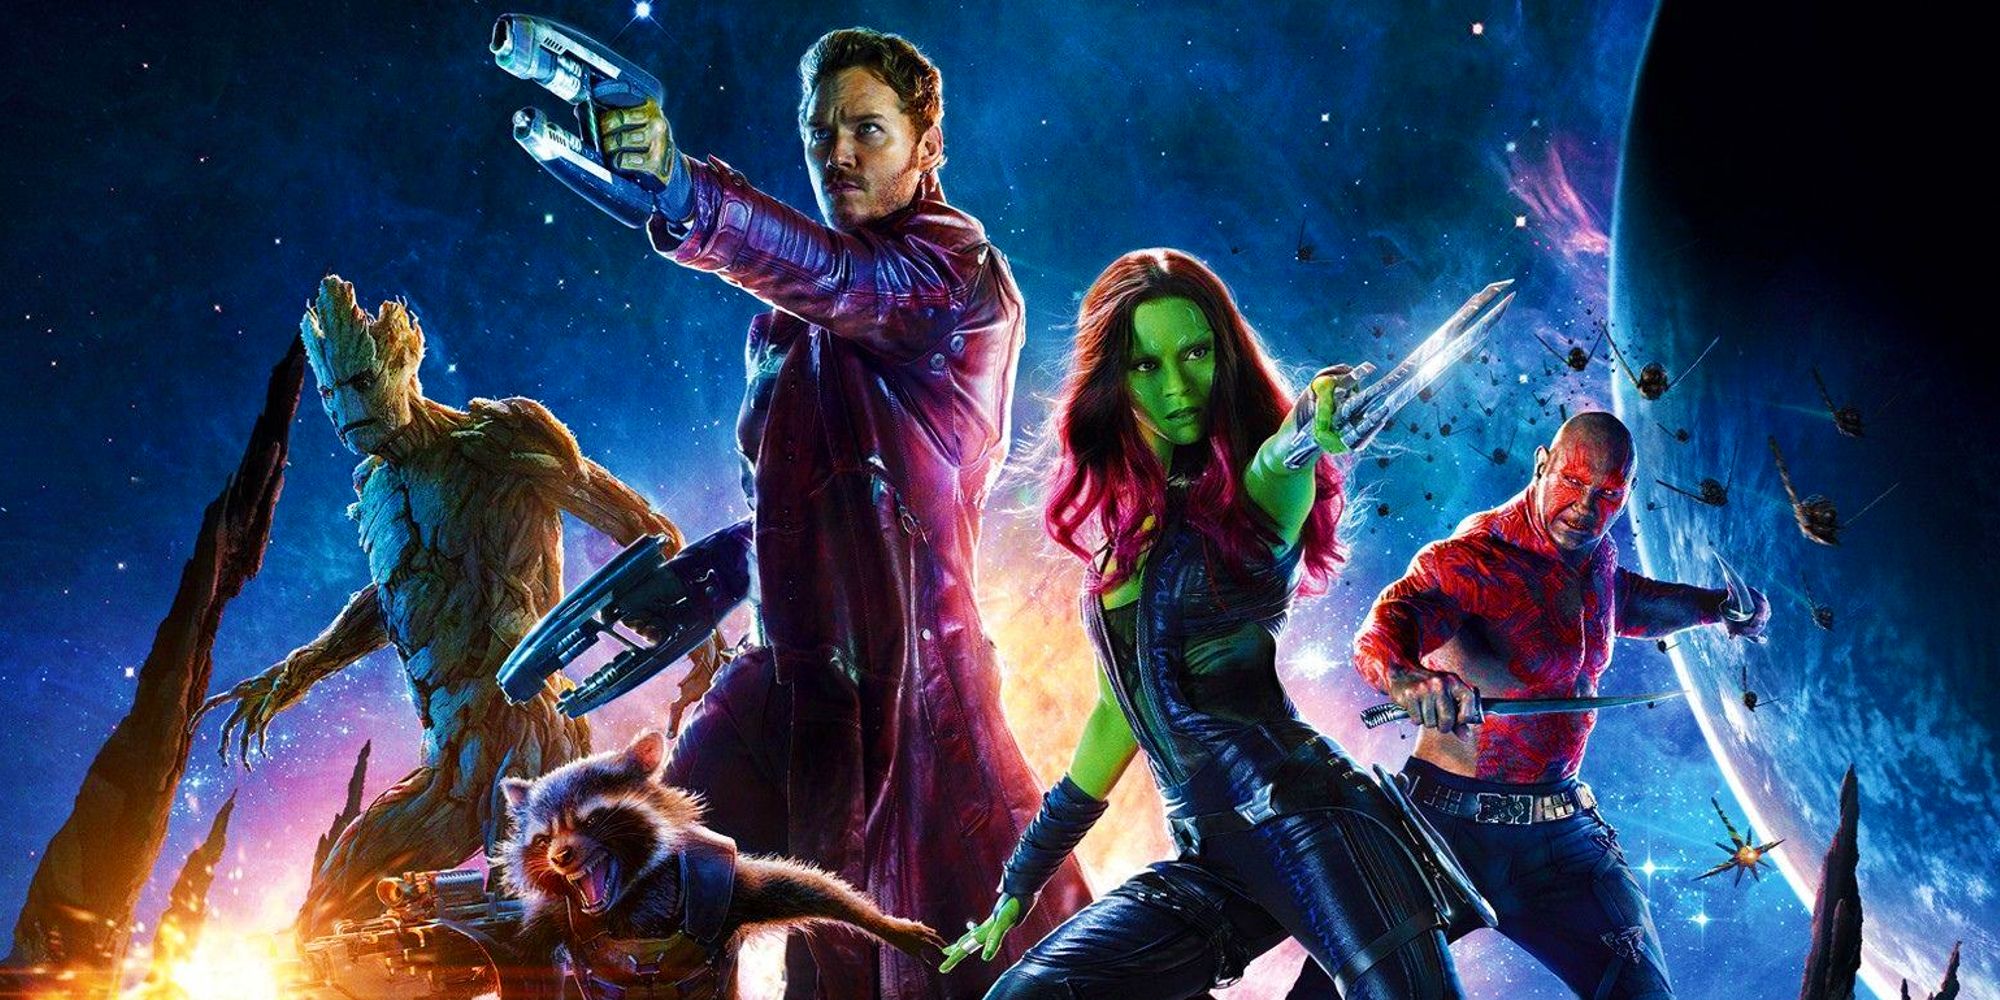 Guardians of the Galaxy 2014's poster featuring the line-up